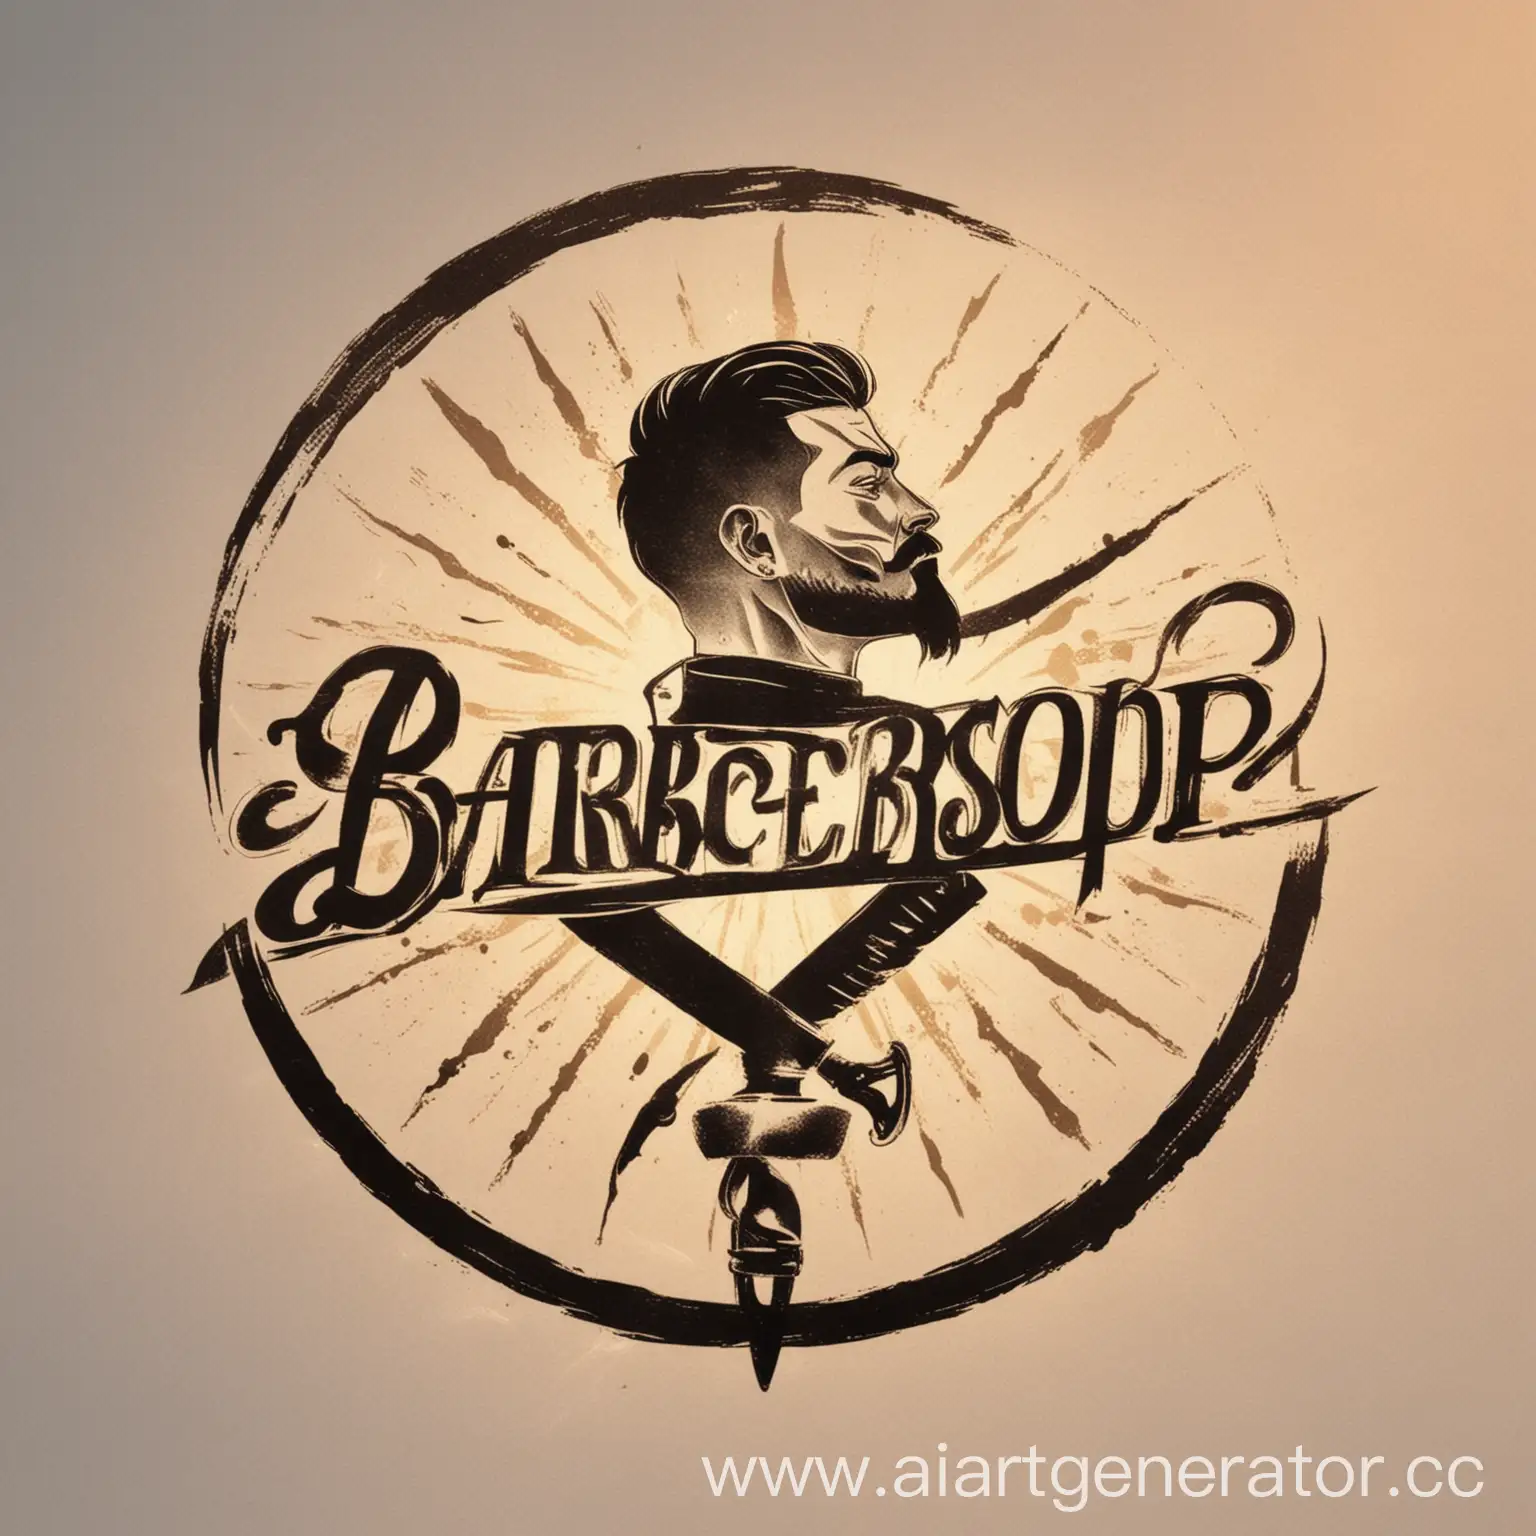 Draw the logo of the Barbershop "August Barber" against the background of the Japanese sun and a straight razor